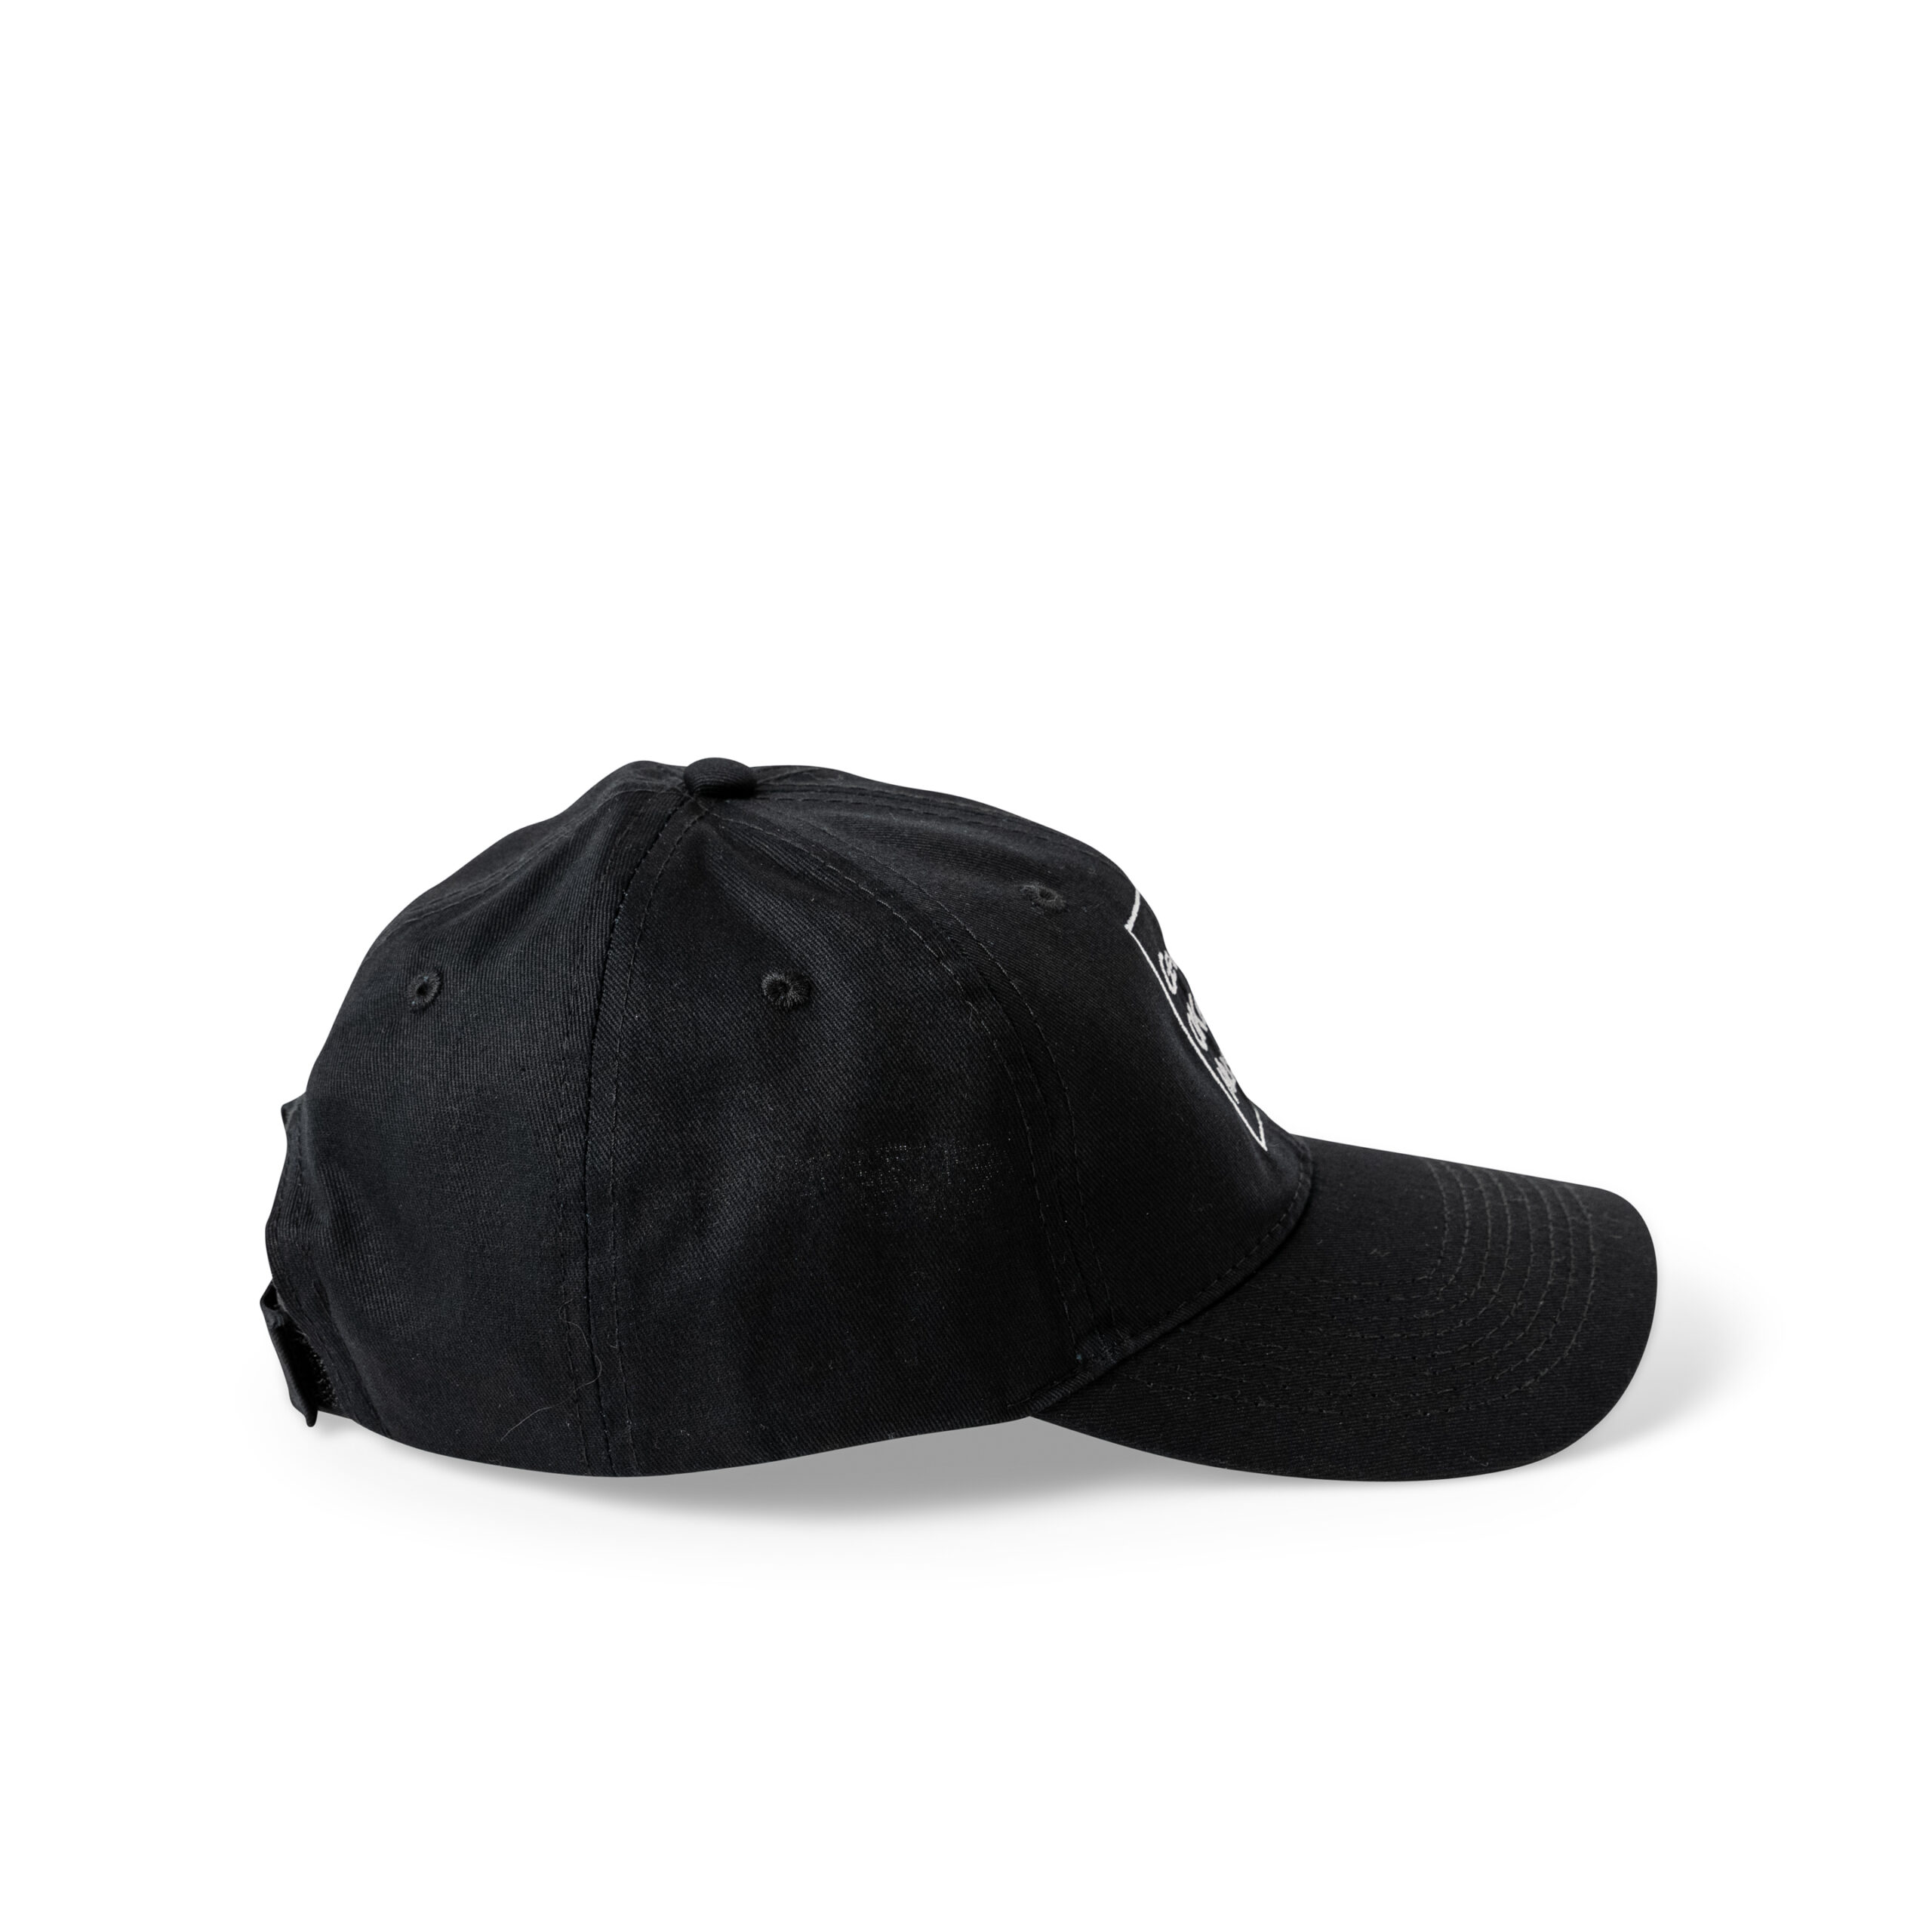 Embroidered Museum Black Ball Cap - The Georgia O'Keeffe Museum